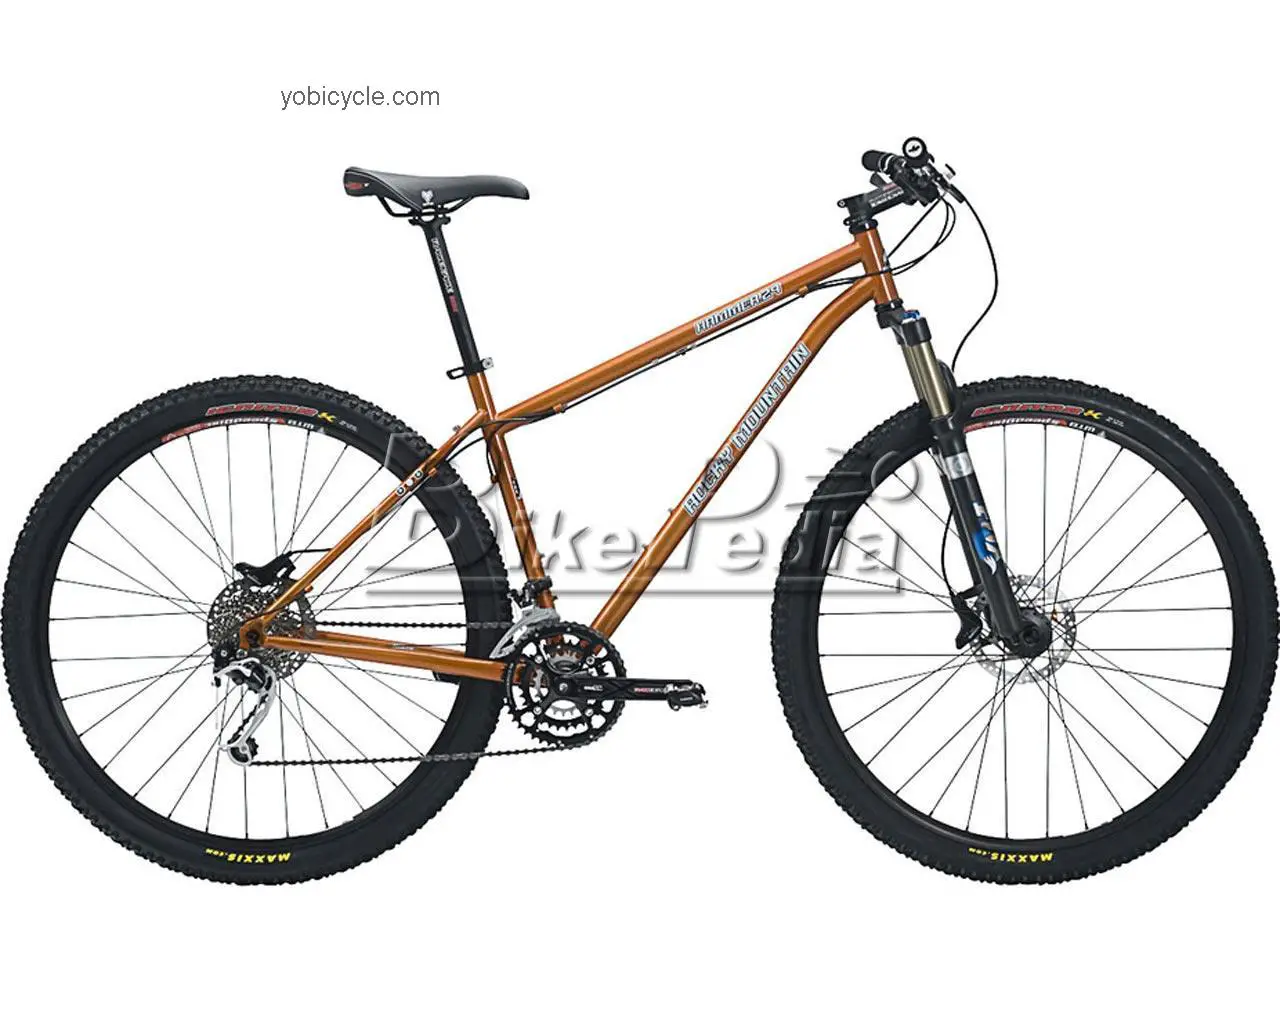 Rocky Mountain Hammer 29 Geared 2009 comparison online with competitors